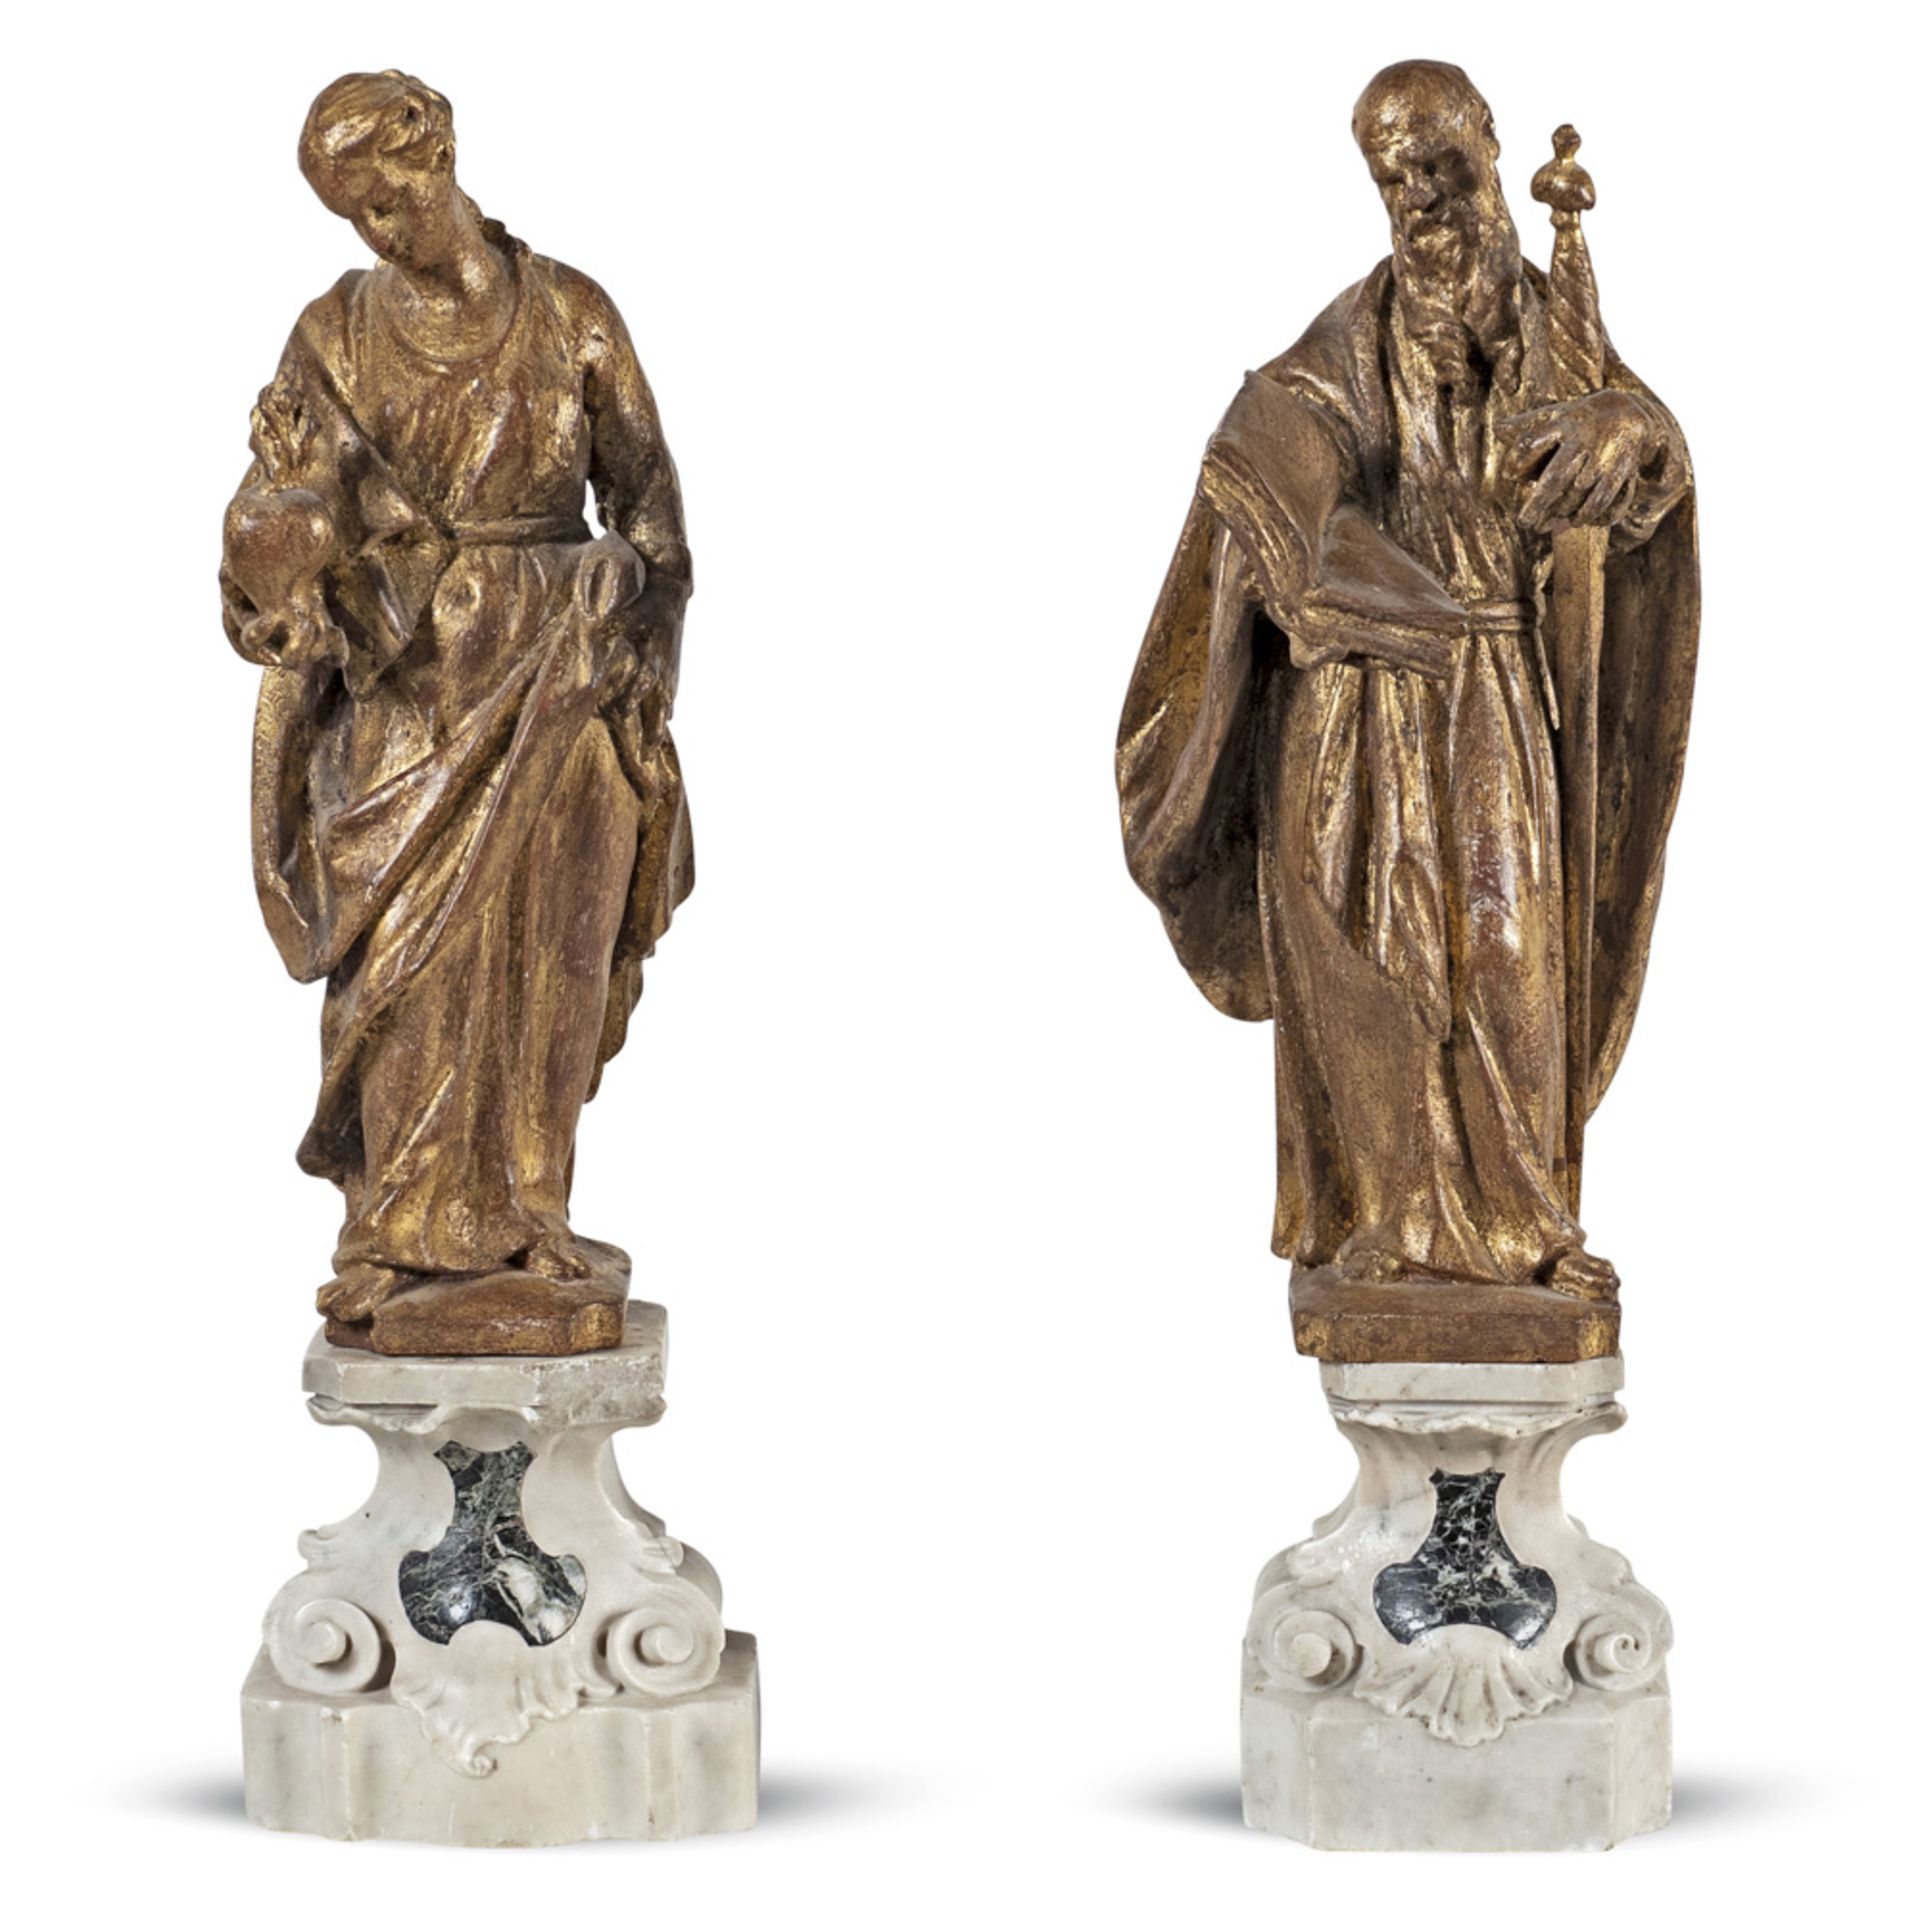 Pair of inlaid and giltwood sculptures Genoa, 17th century h. sculptures 38 cm.